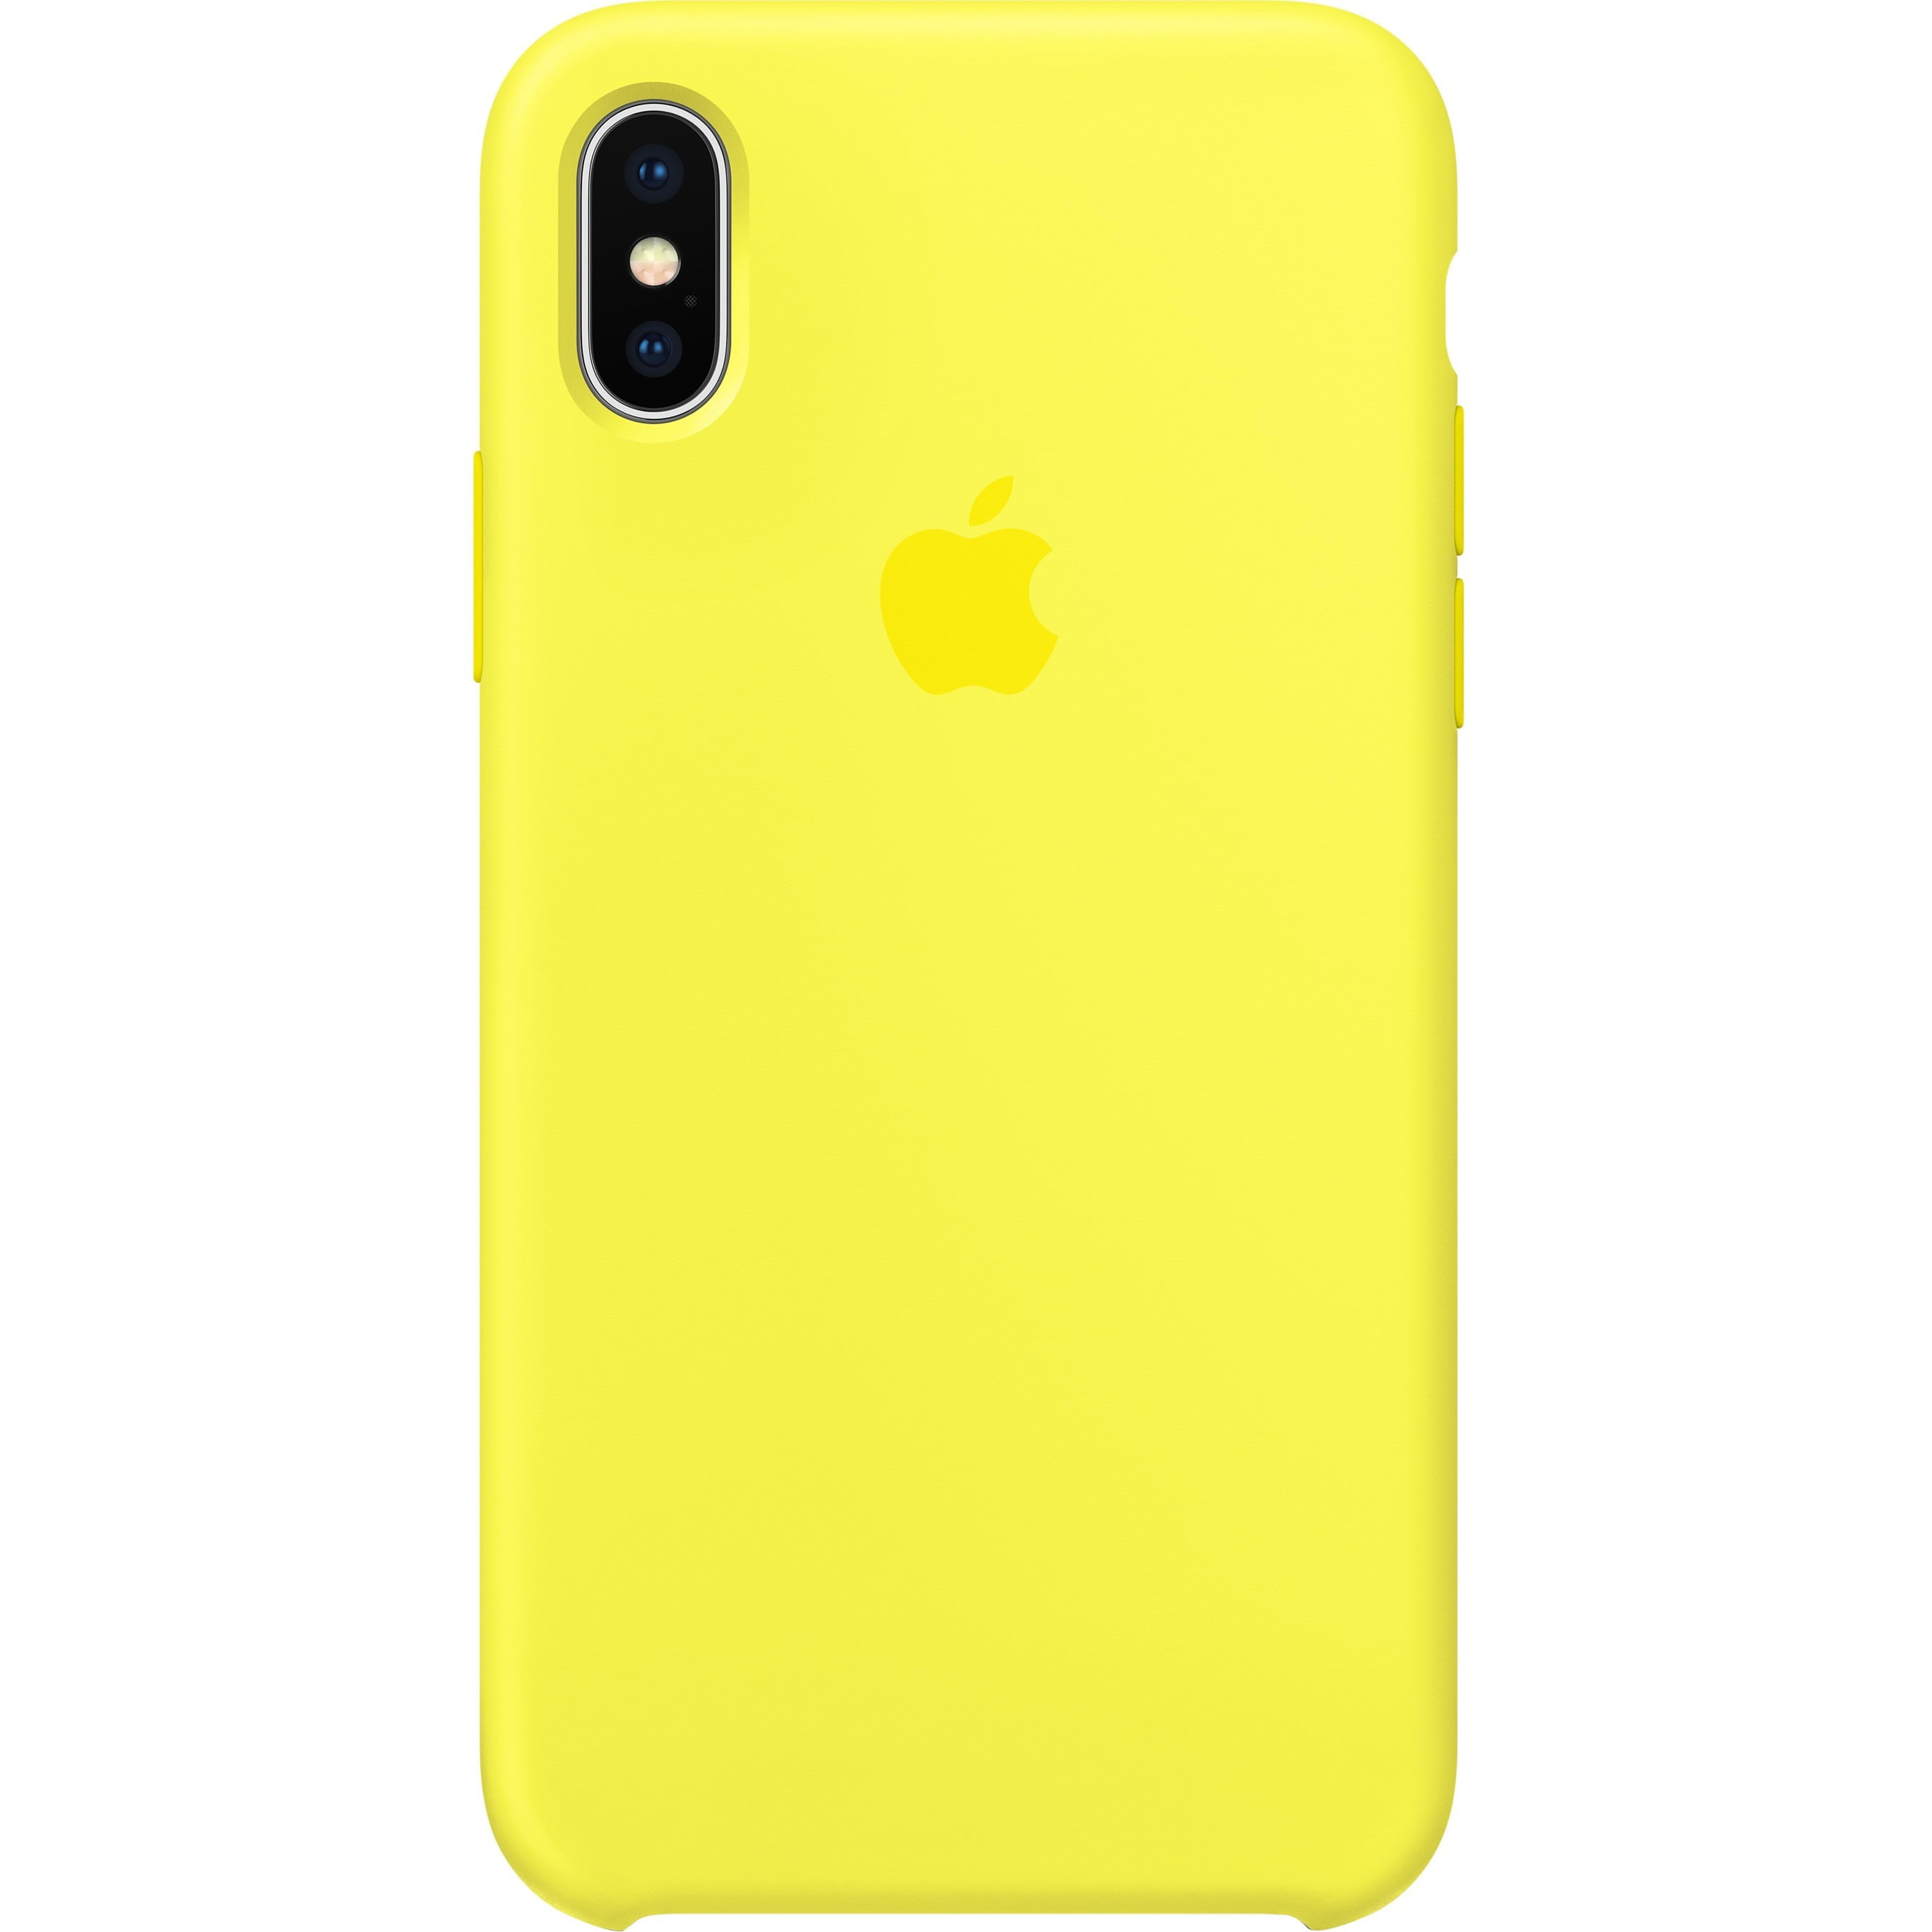 Inspired by Flash silicone iPhone case Flash phone silicone case 7 plus iPhone X iPhone XR iPhone XS Max iPhone 8 iPhone 6 cover 6s 5 5s se slim silicone case for Apple iPhone superhero dc 